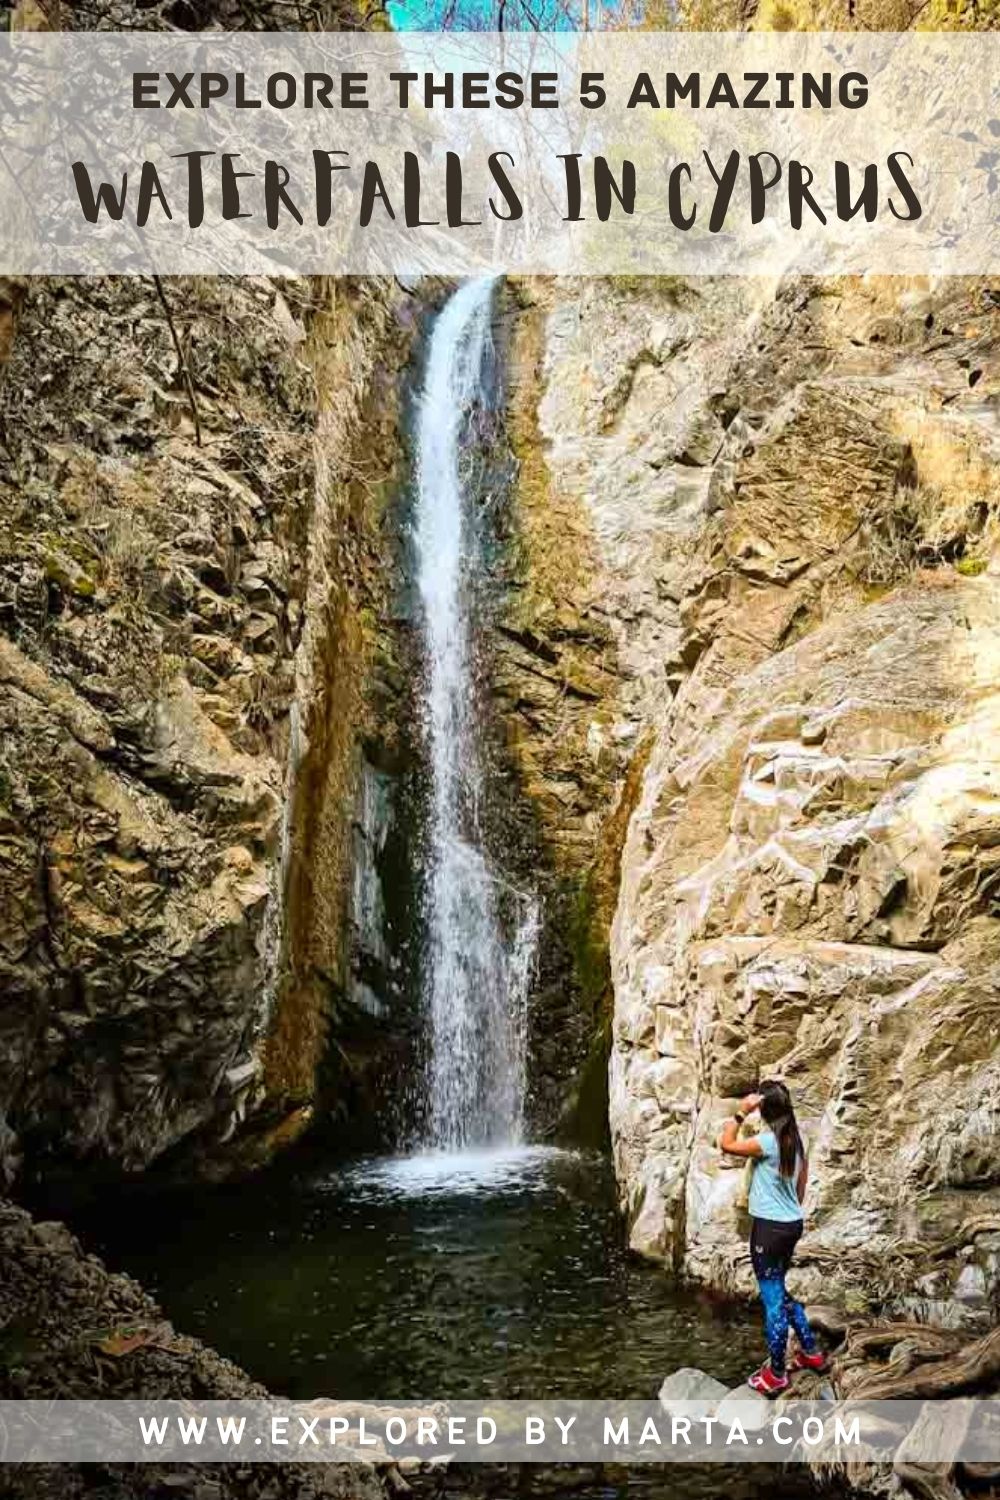 Explore these 5 amazing waterfalls in Cyprus